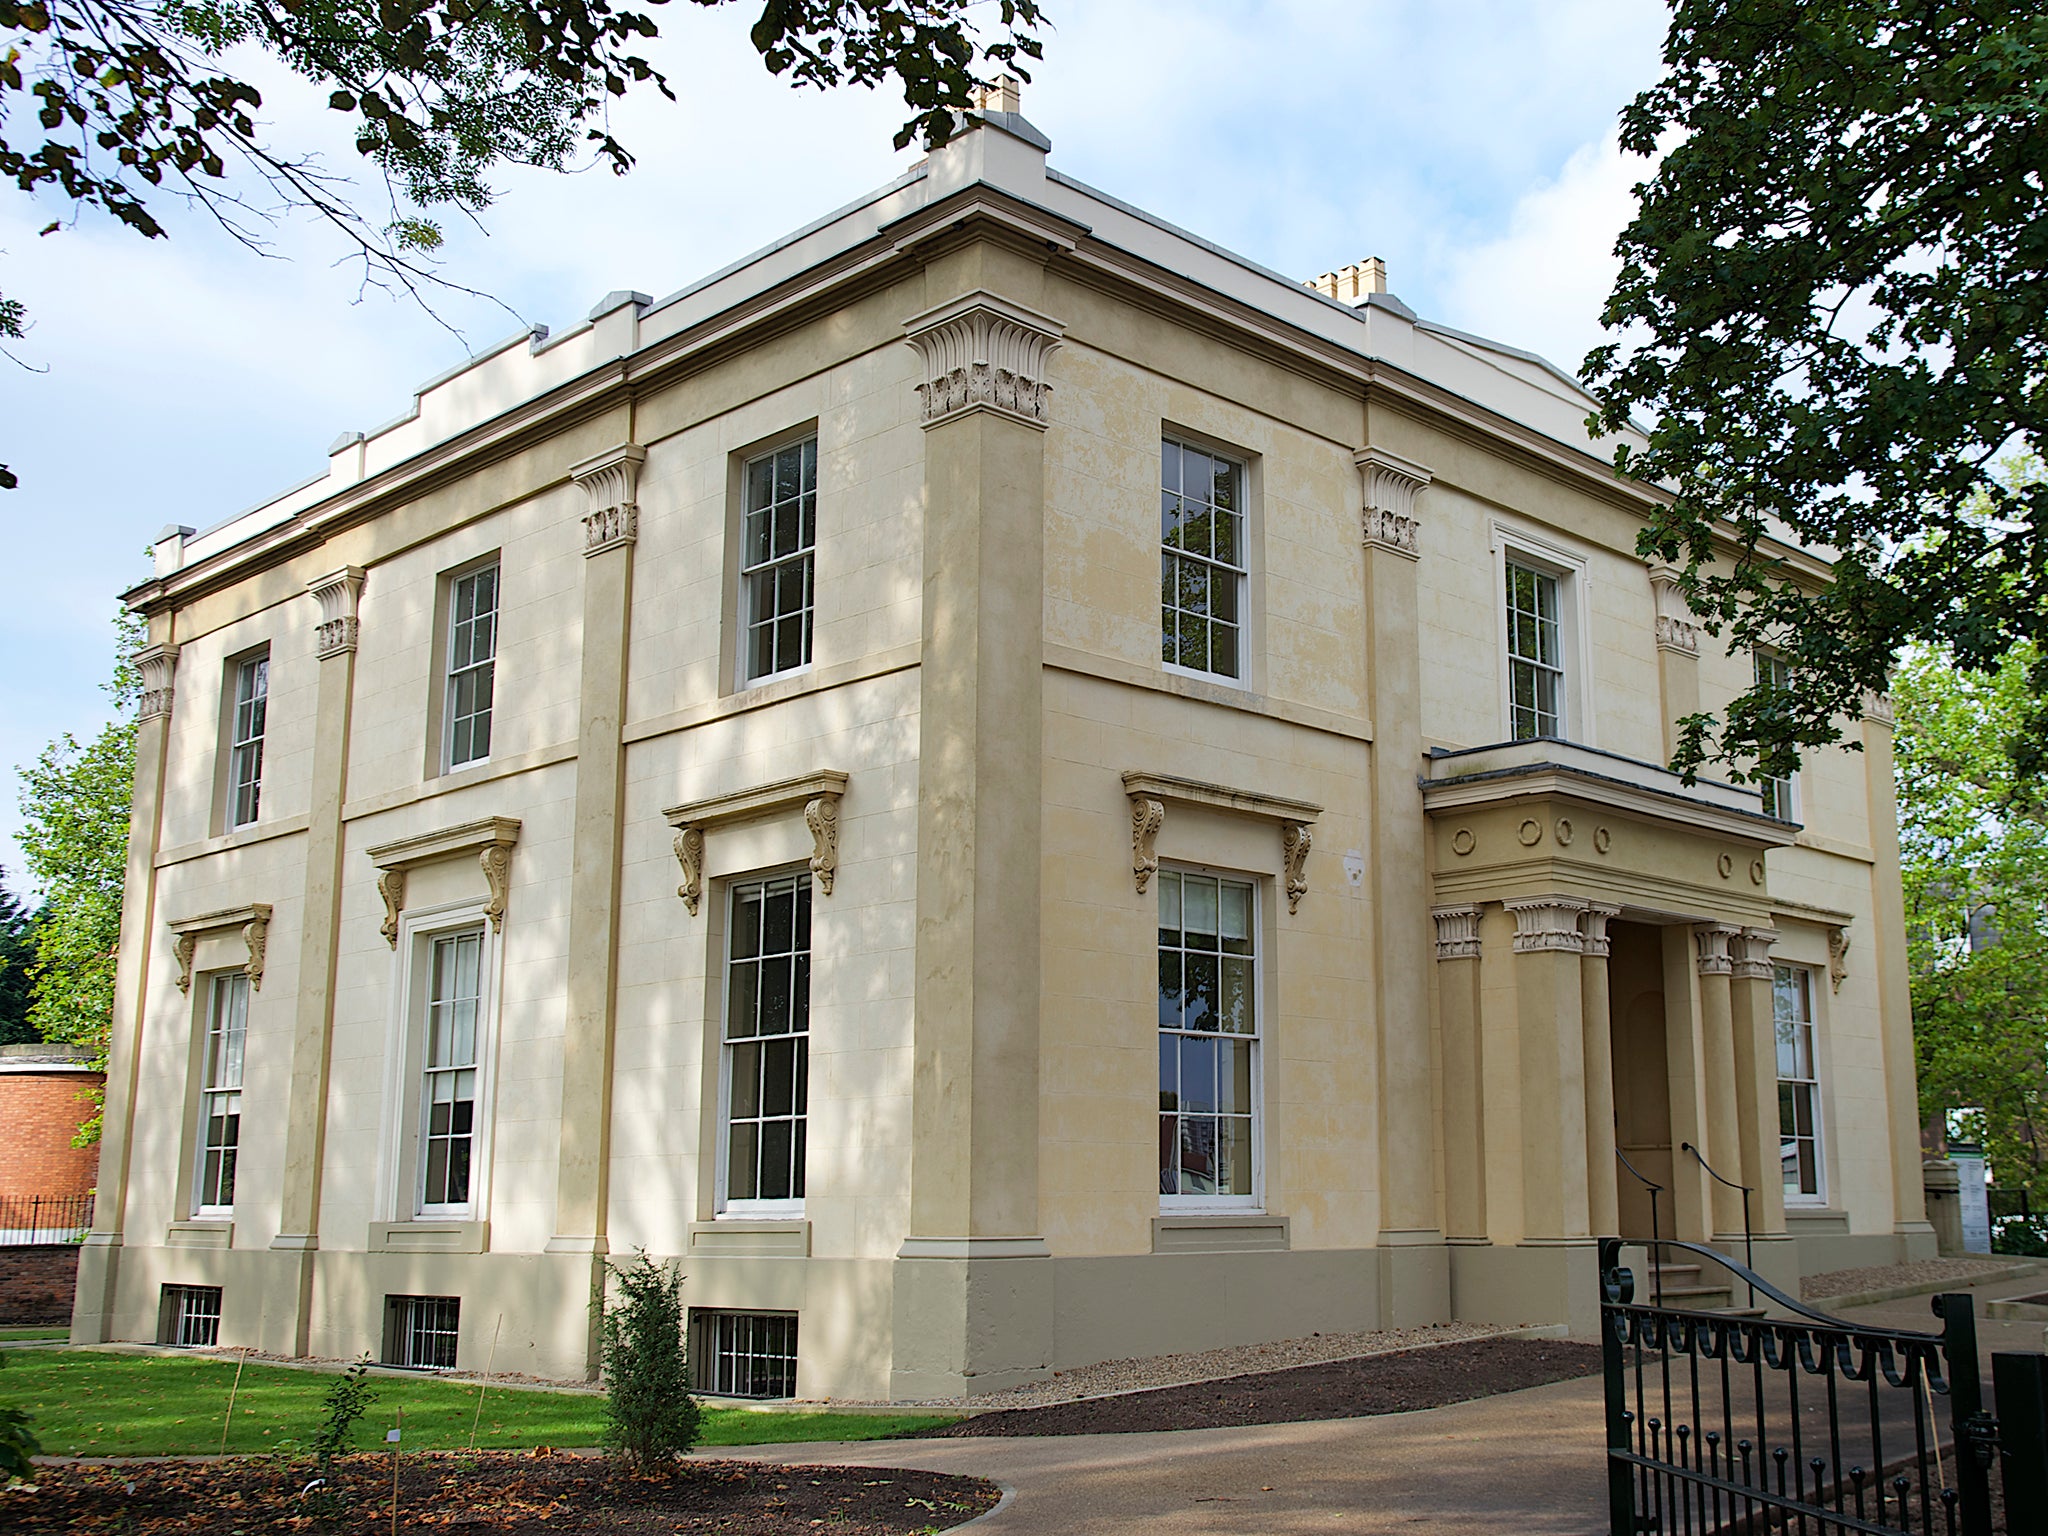 Elizabeth Gaskell's house from the outside